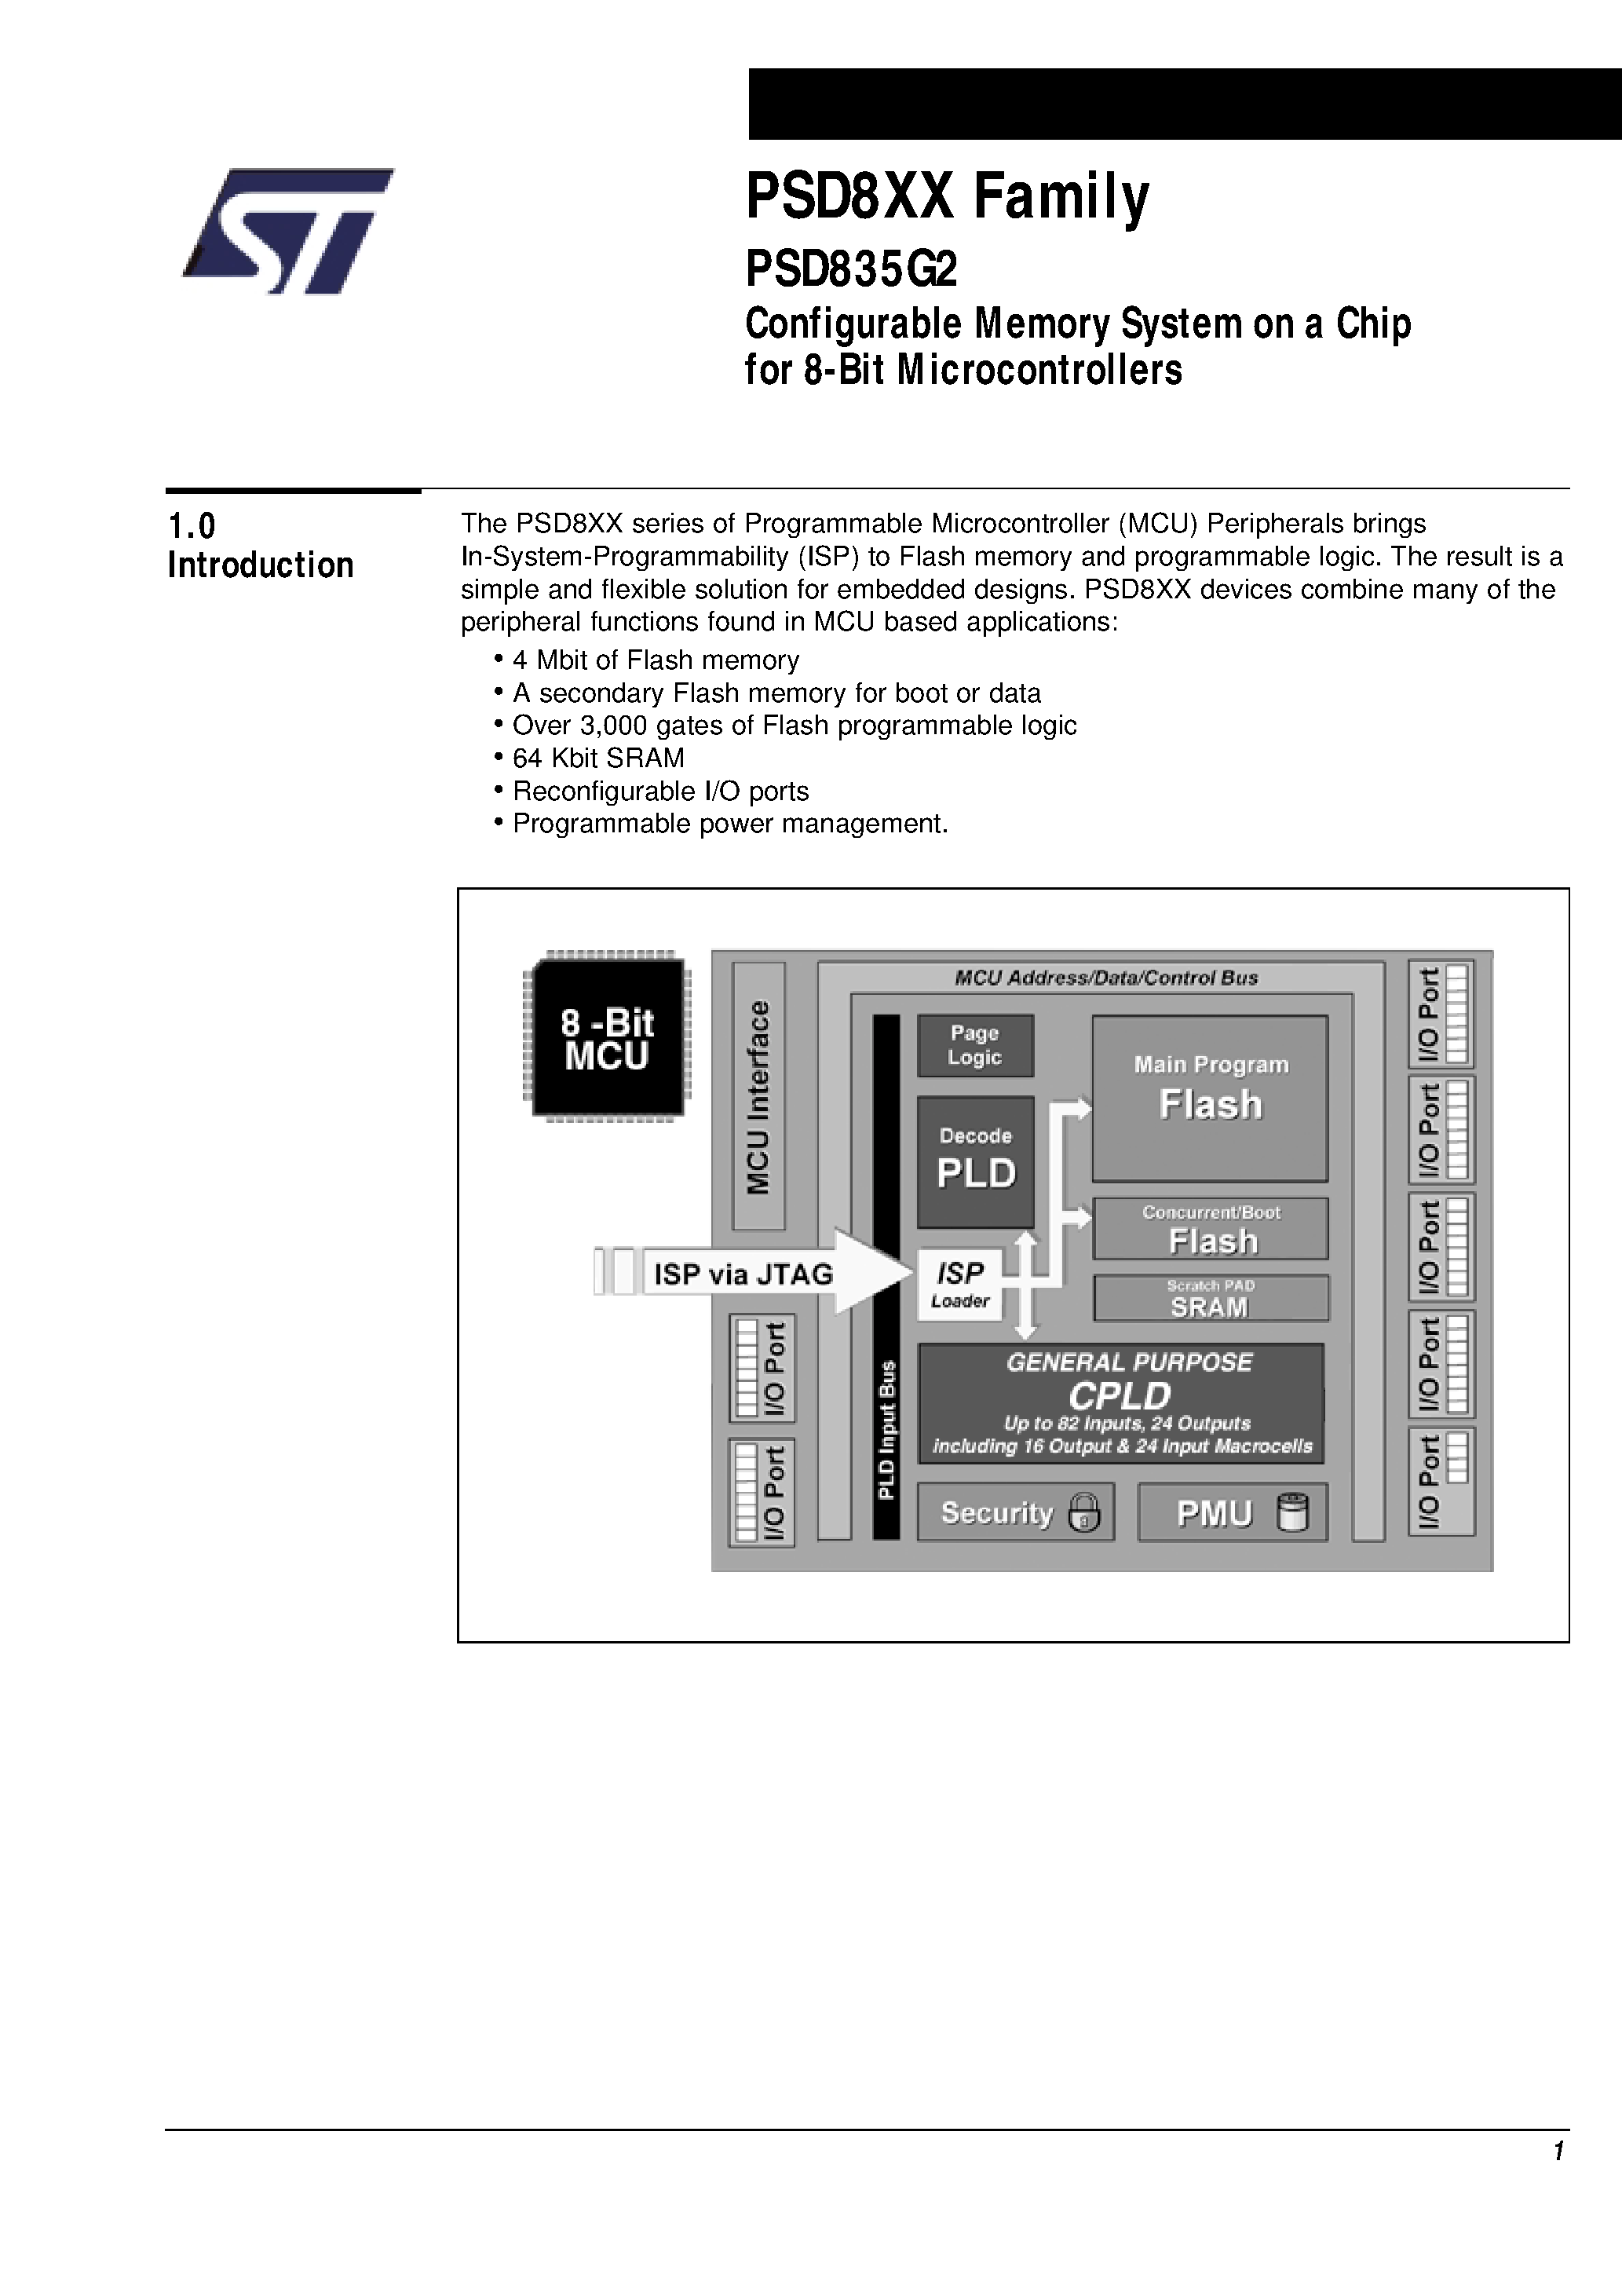 Datasheet PSD835F2-A-15B81 - Configurable Memory System on a Chip for 8-Bit Microcontrollers page 2